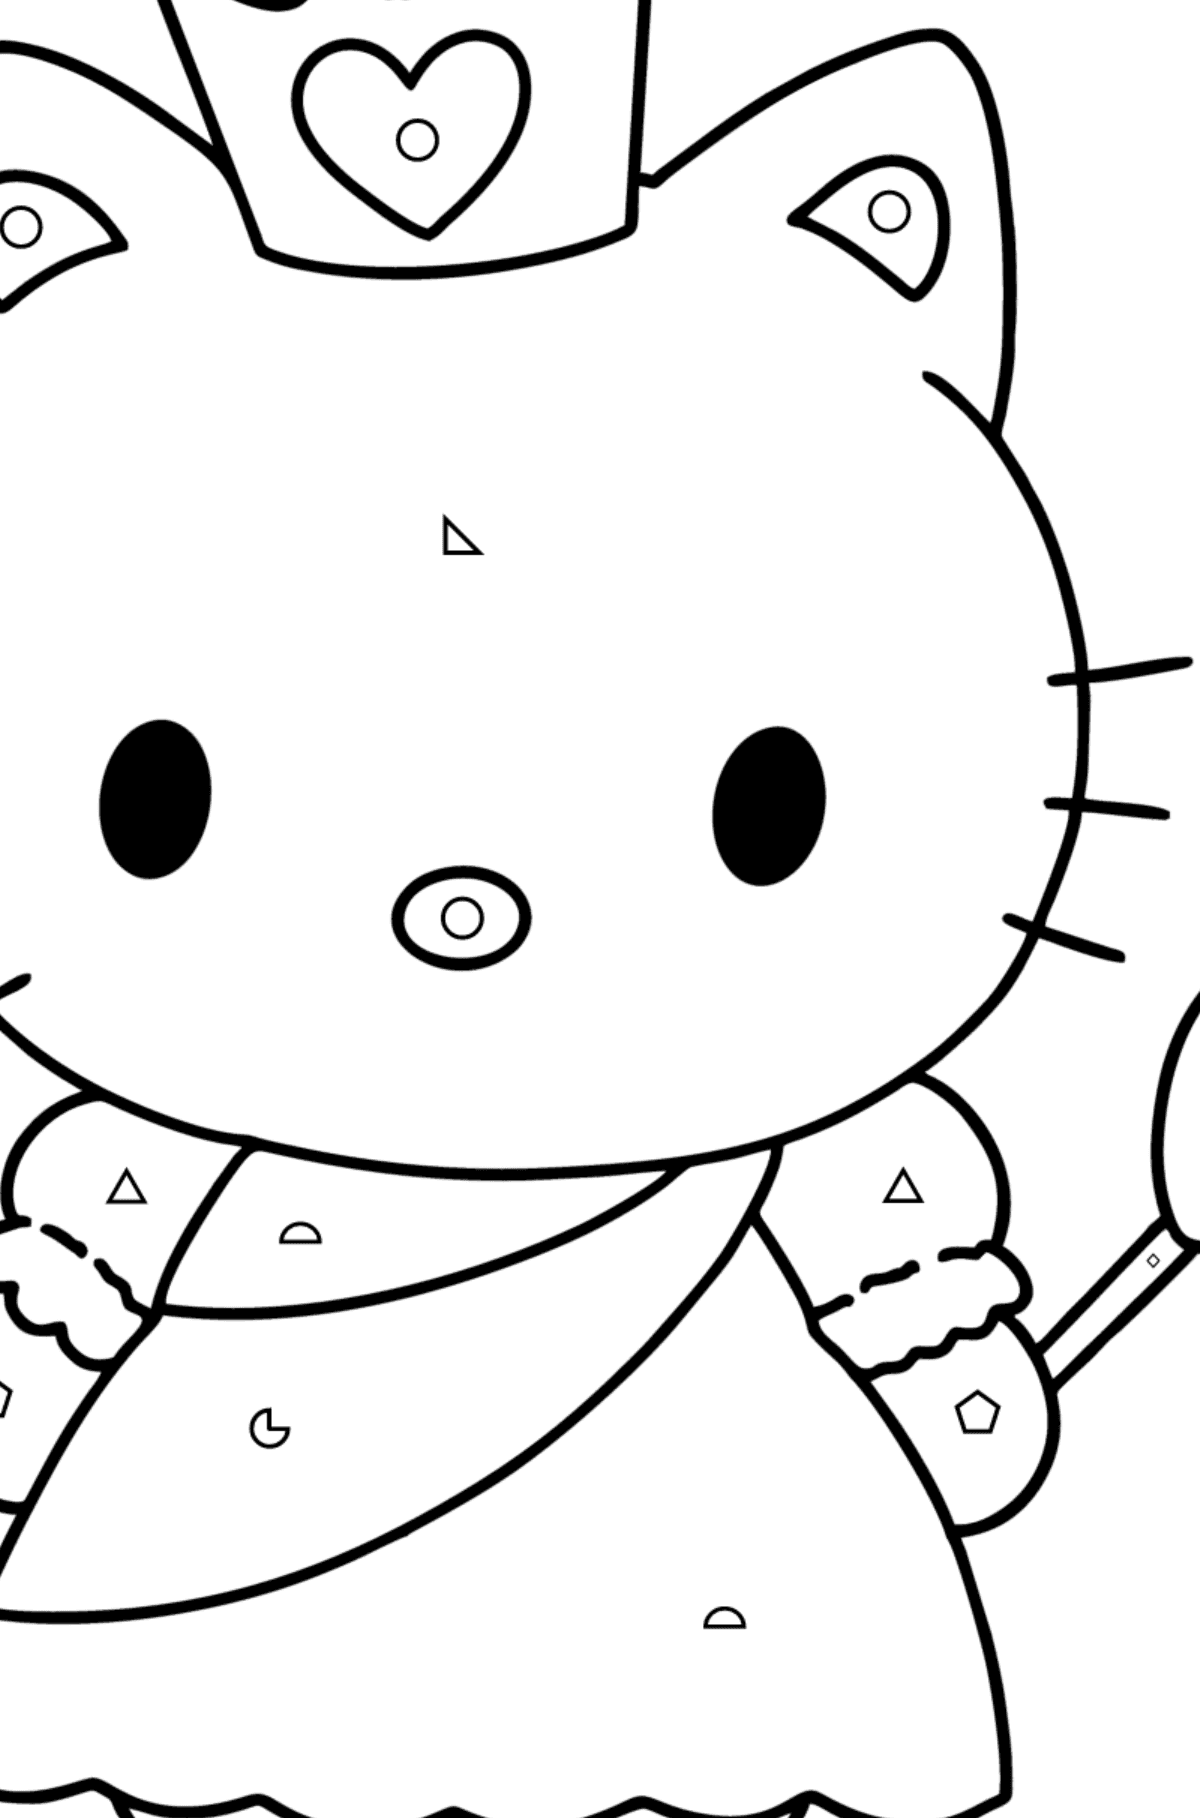 Hello Kitty Princess coloring page - Coloring by Geometric Shapes for Kids